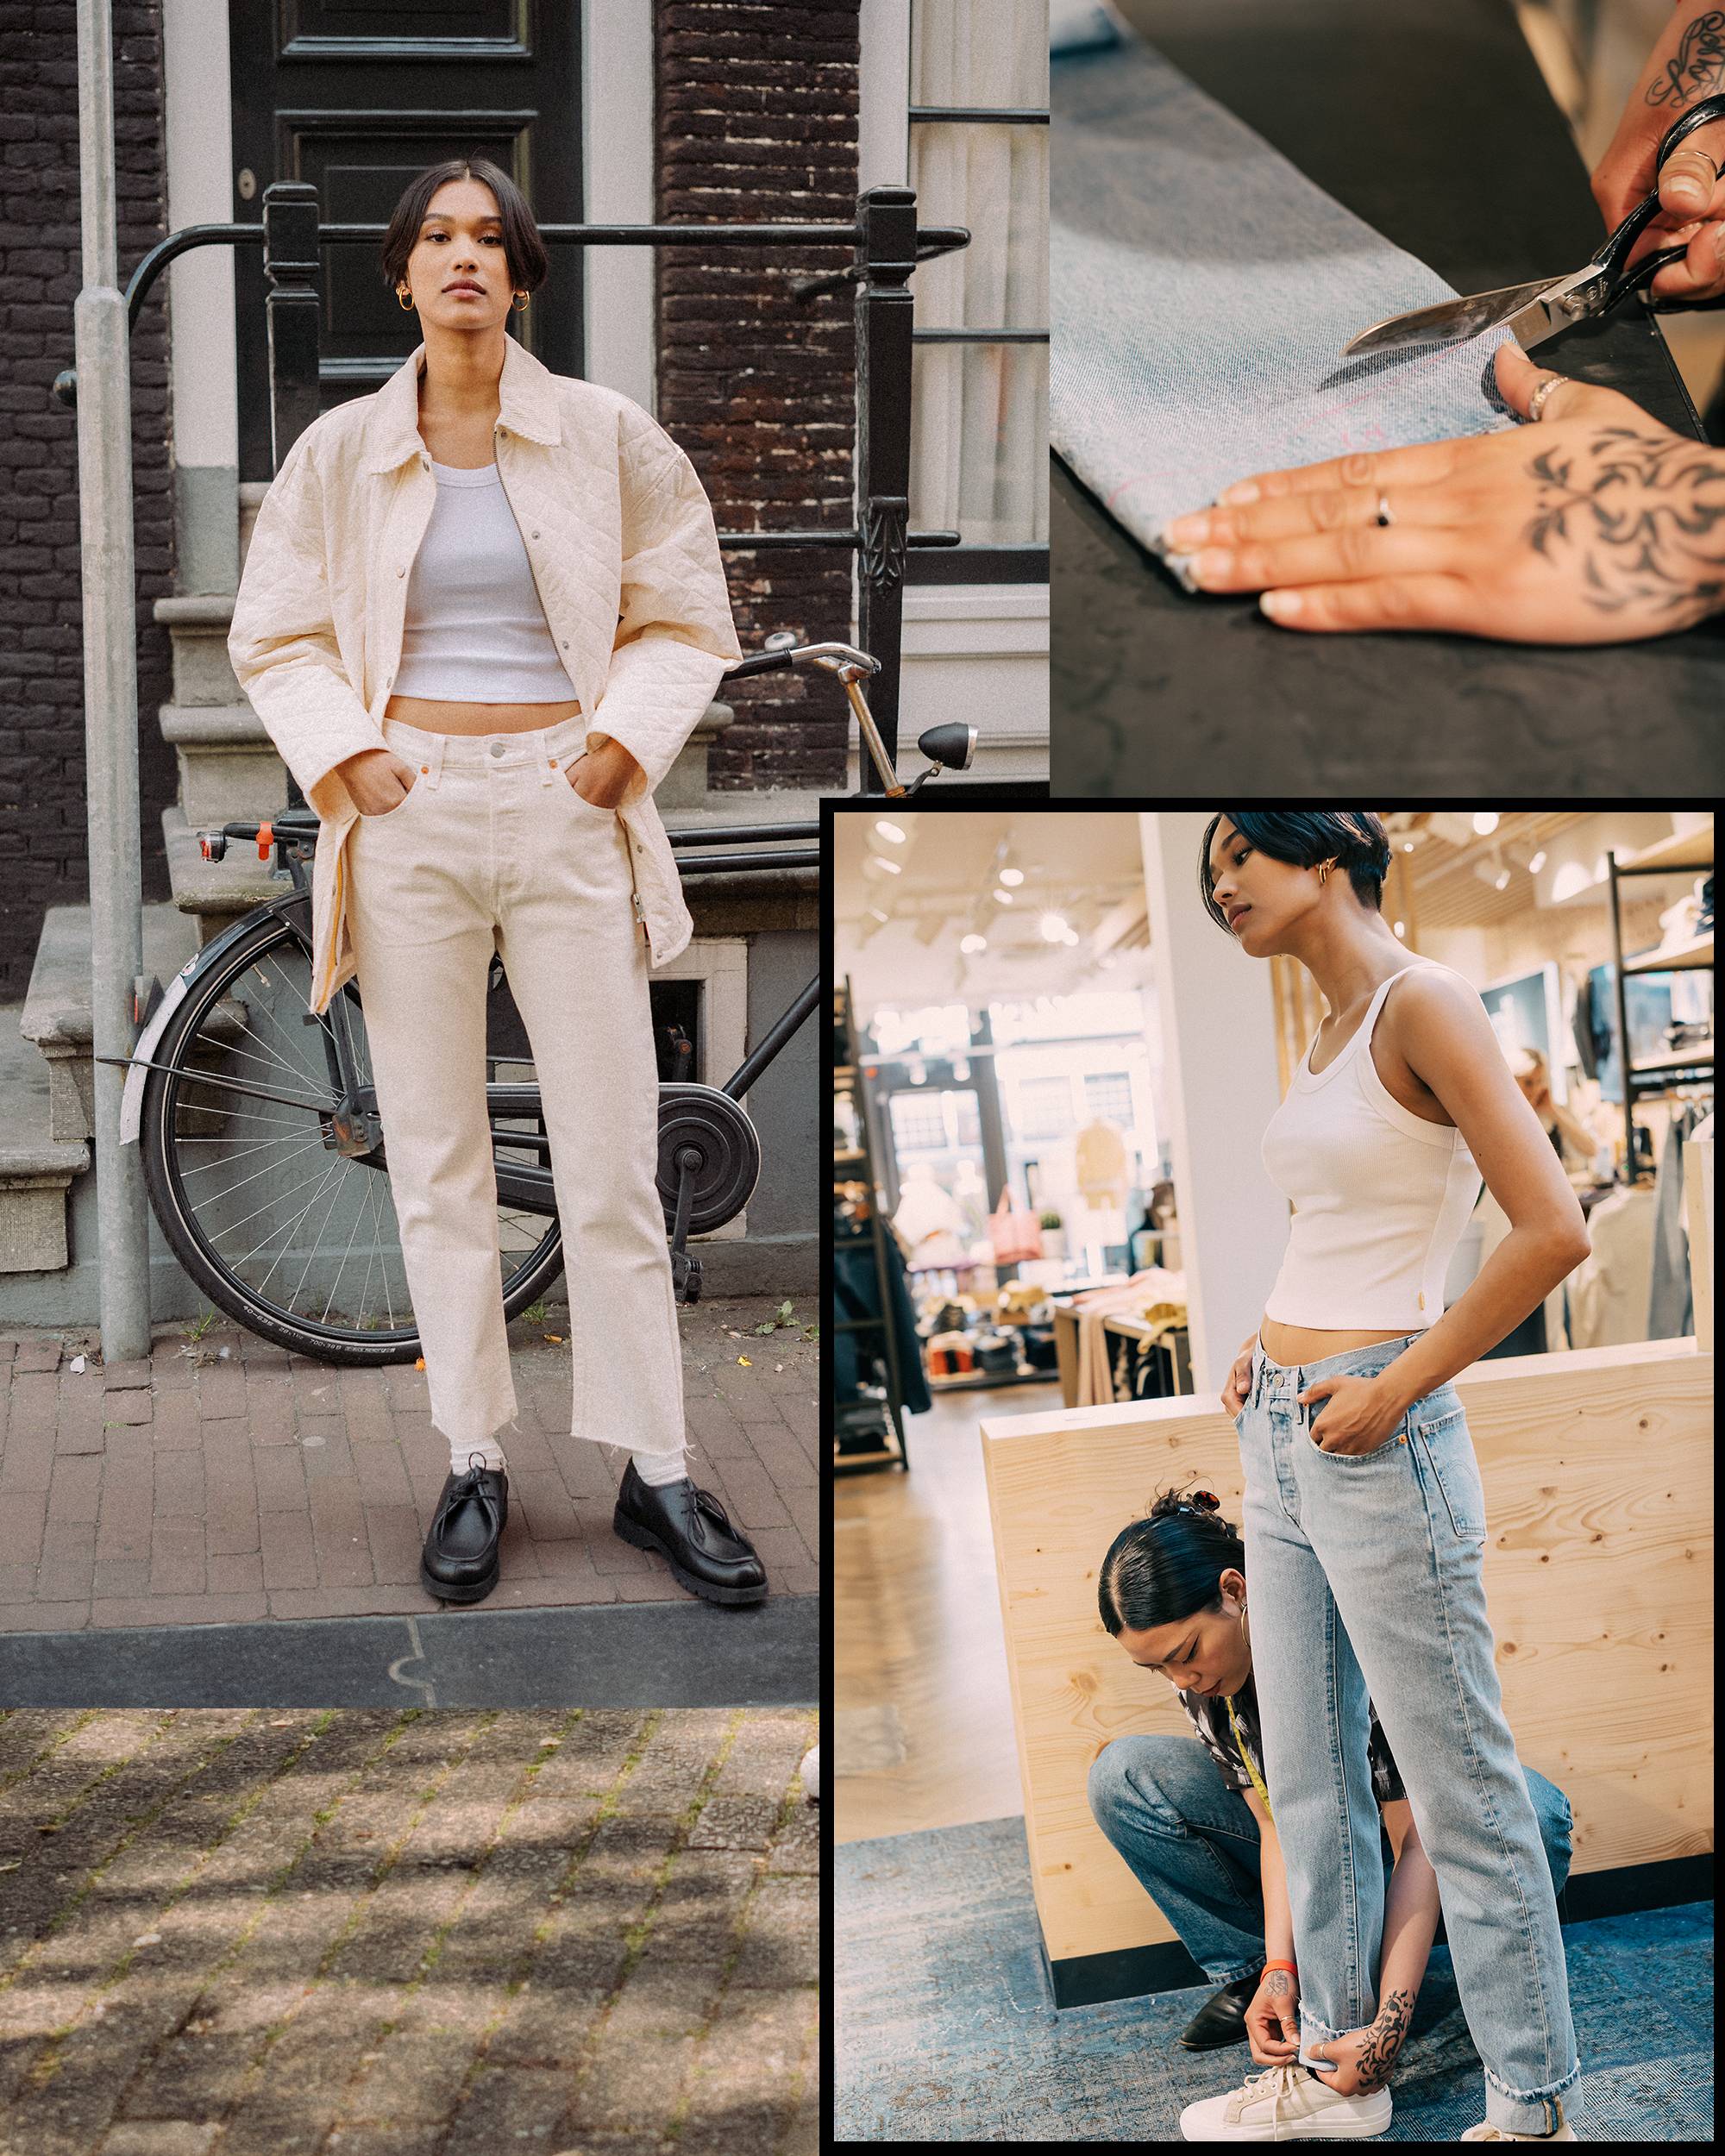 The Raw Frayed Hem Jeans Trend For Men - THE JEANS BLOG